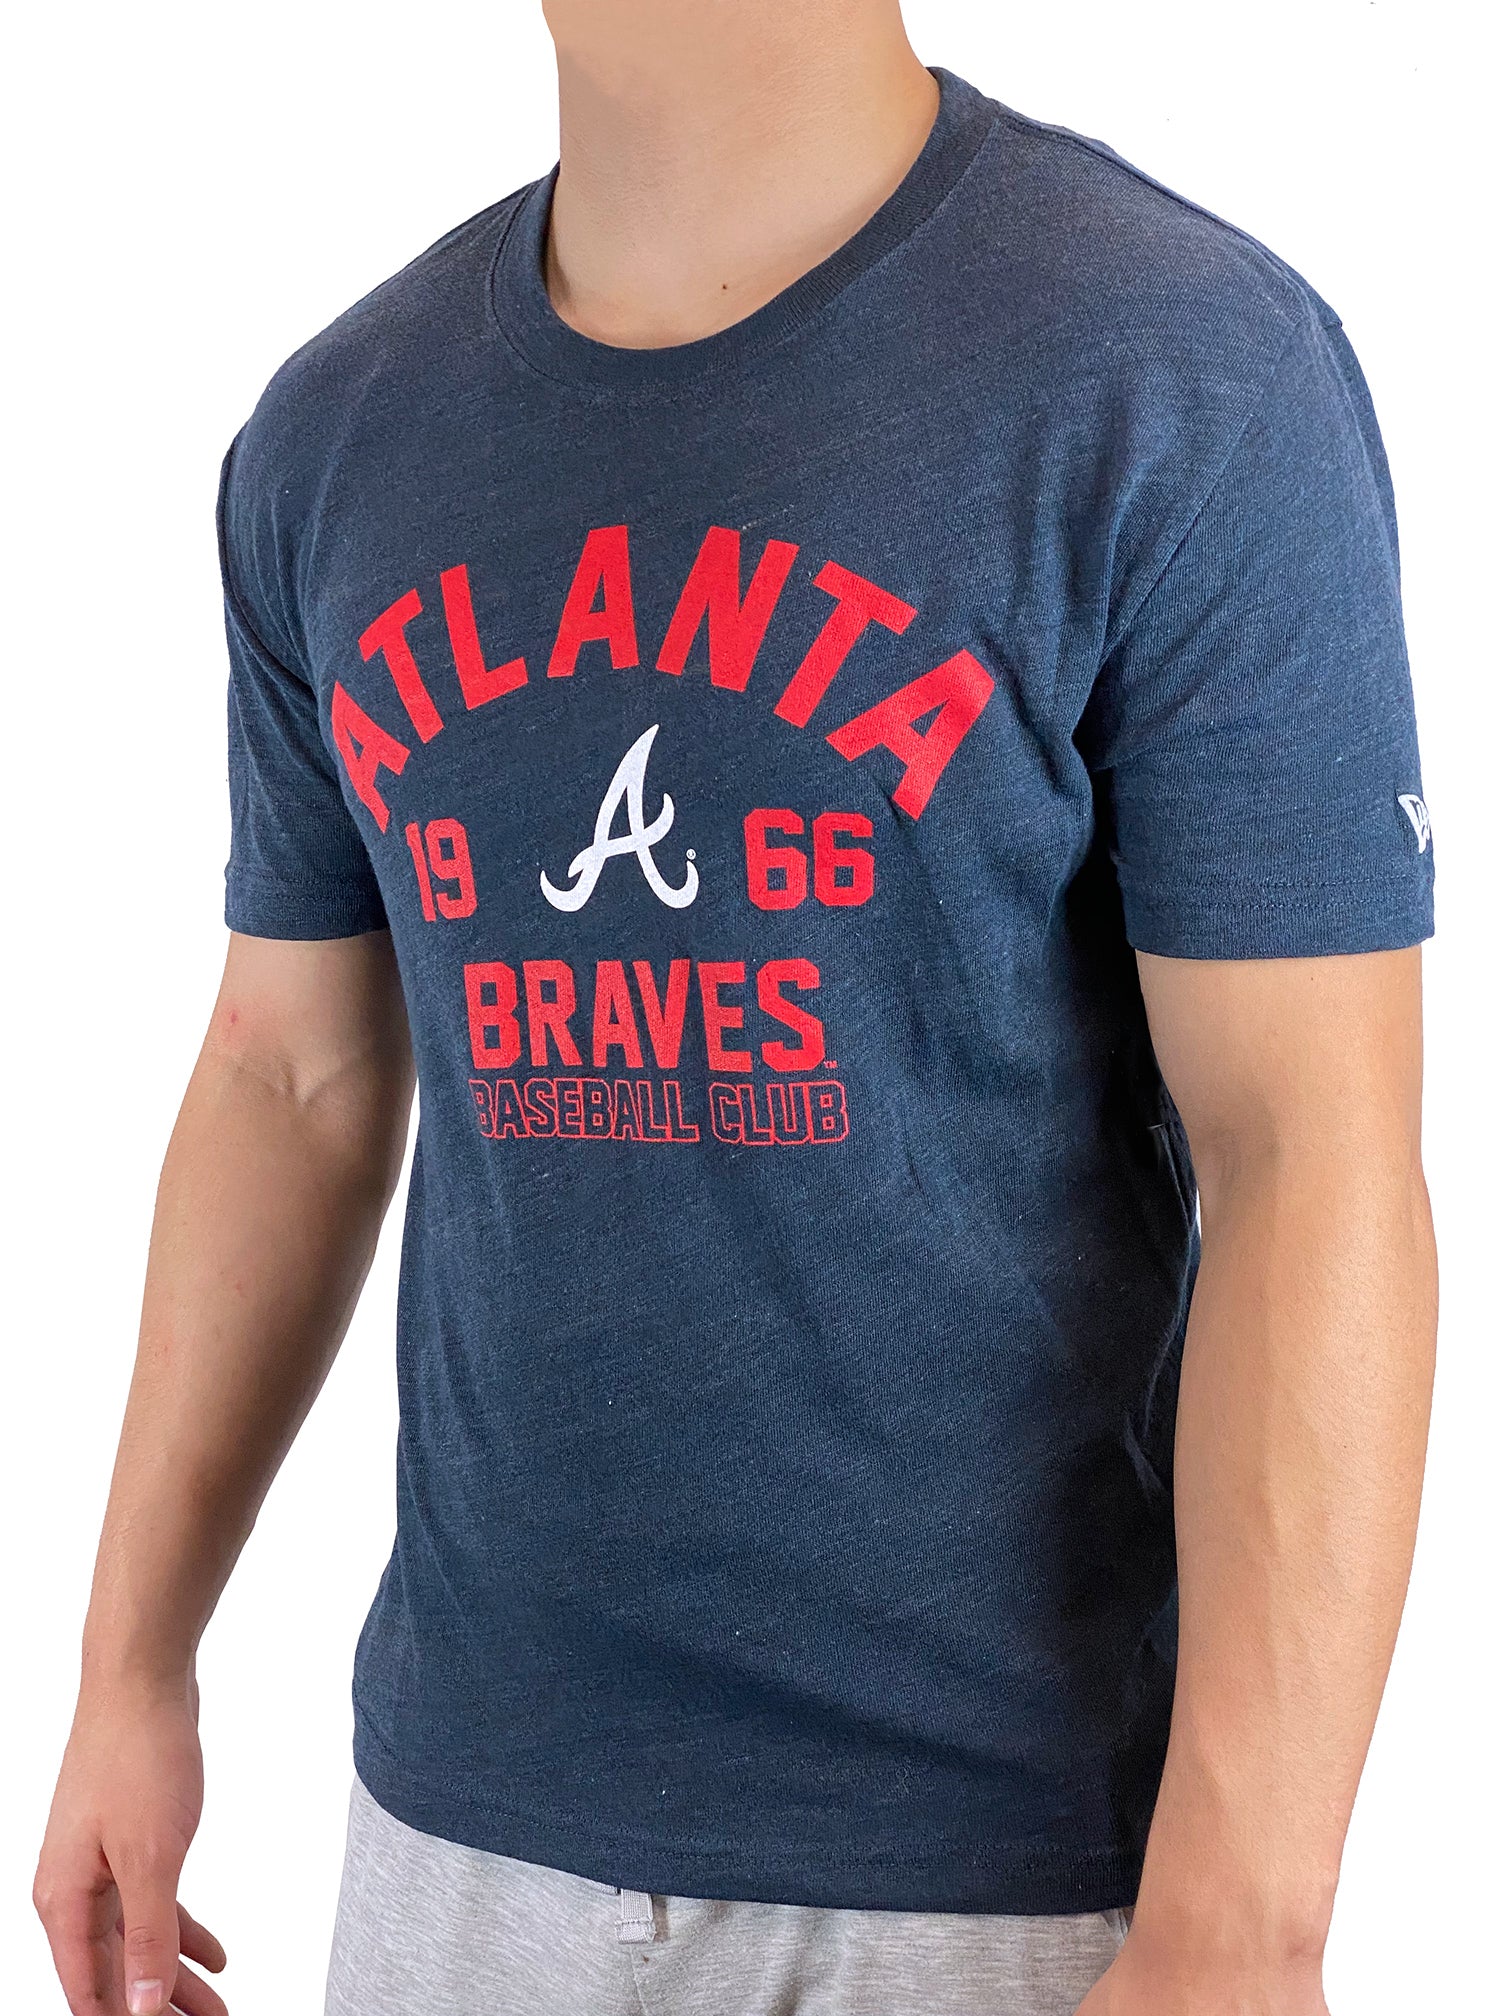 for the a braves shirt